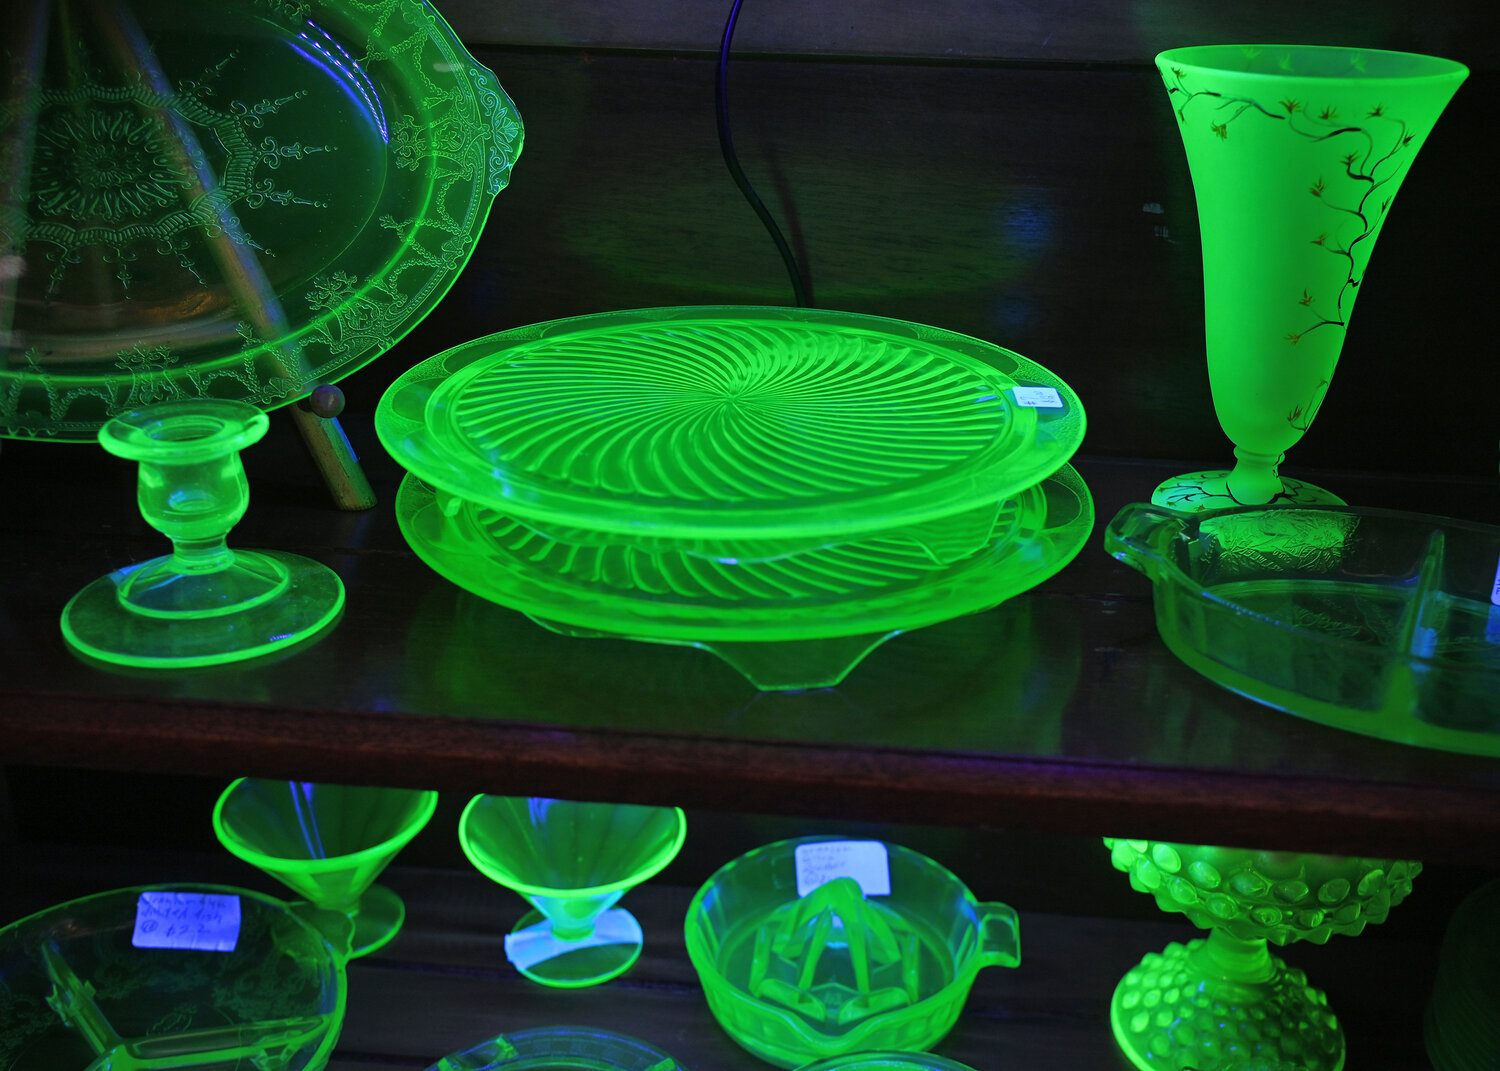 A display of uranium glass glows Friday, March 10 at Victoria Rose in Bouckville.